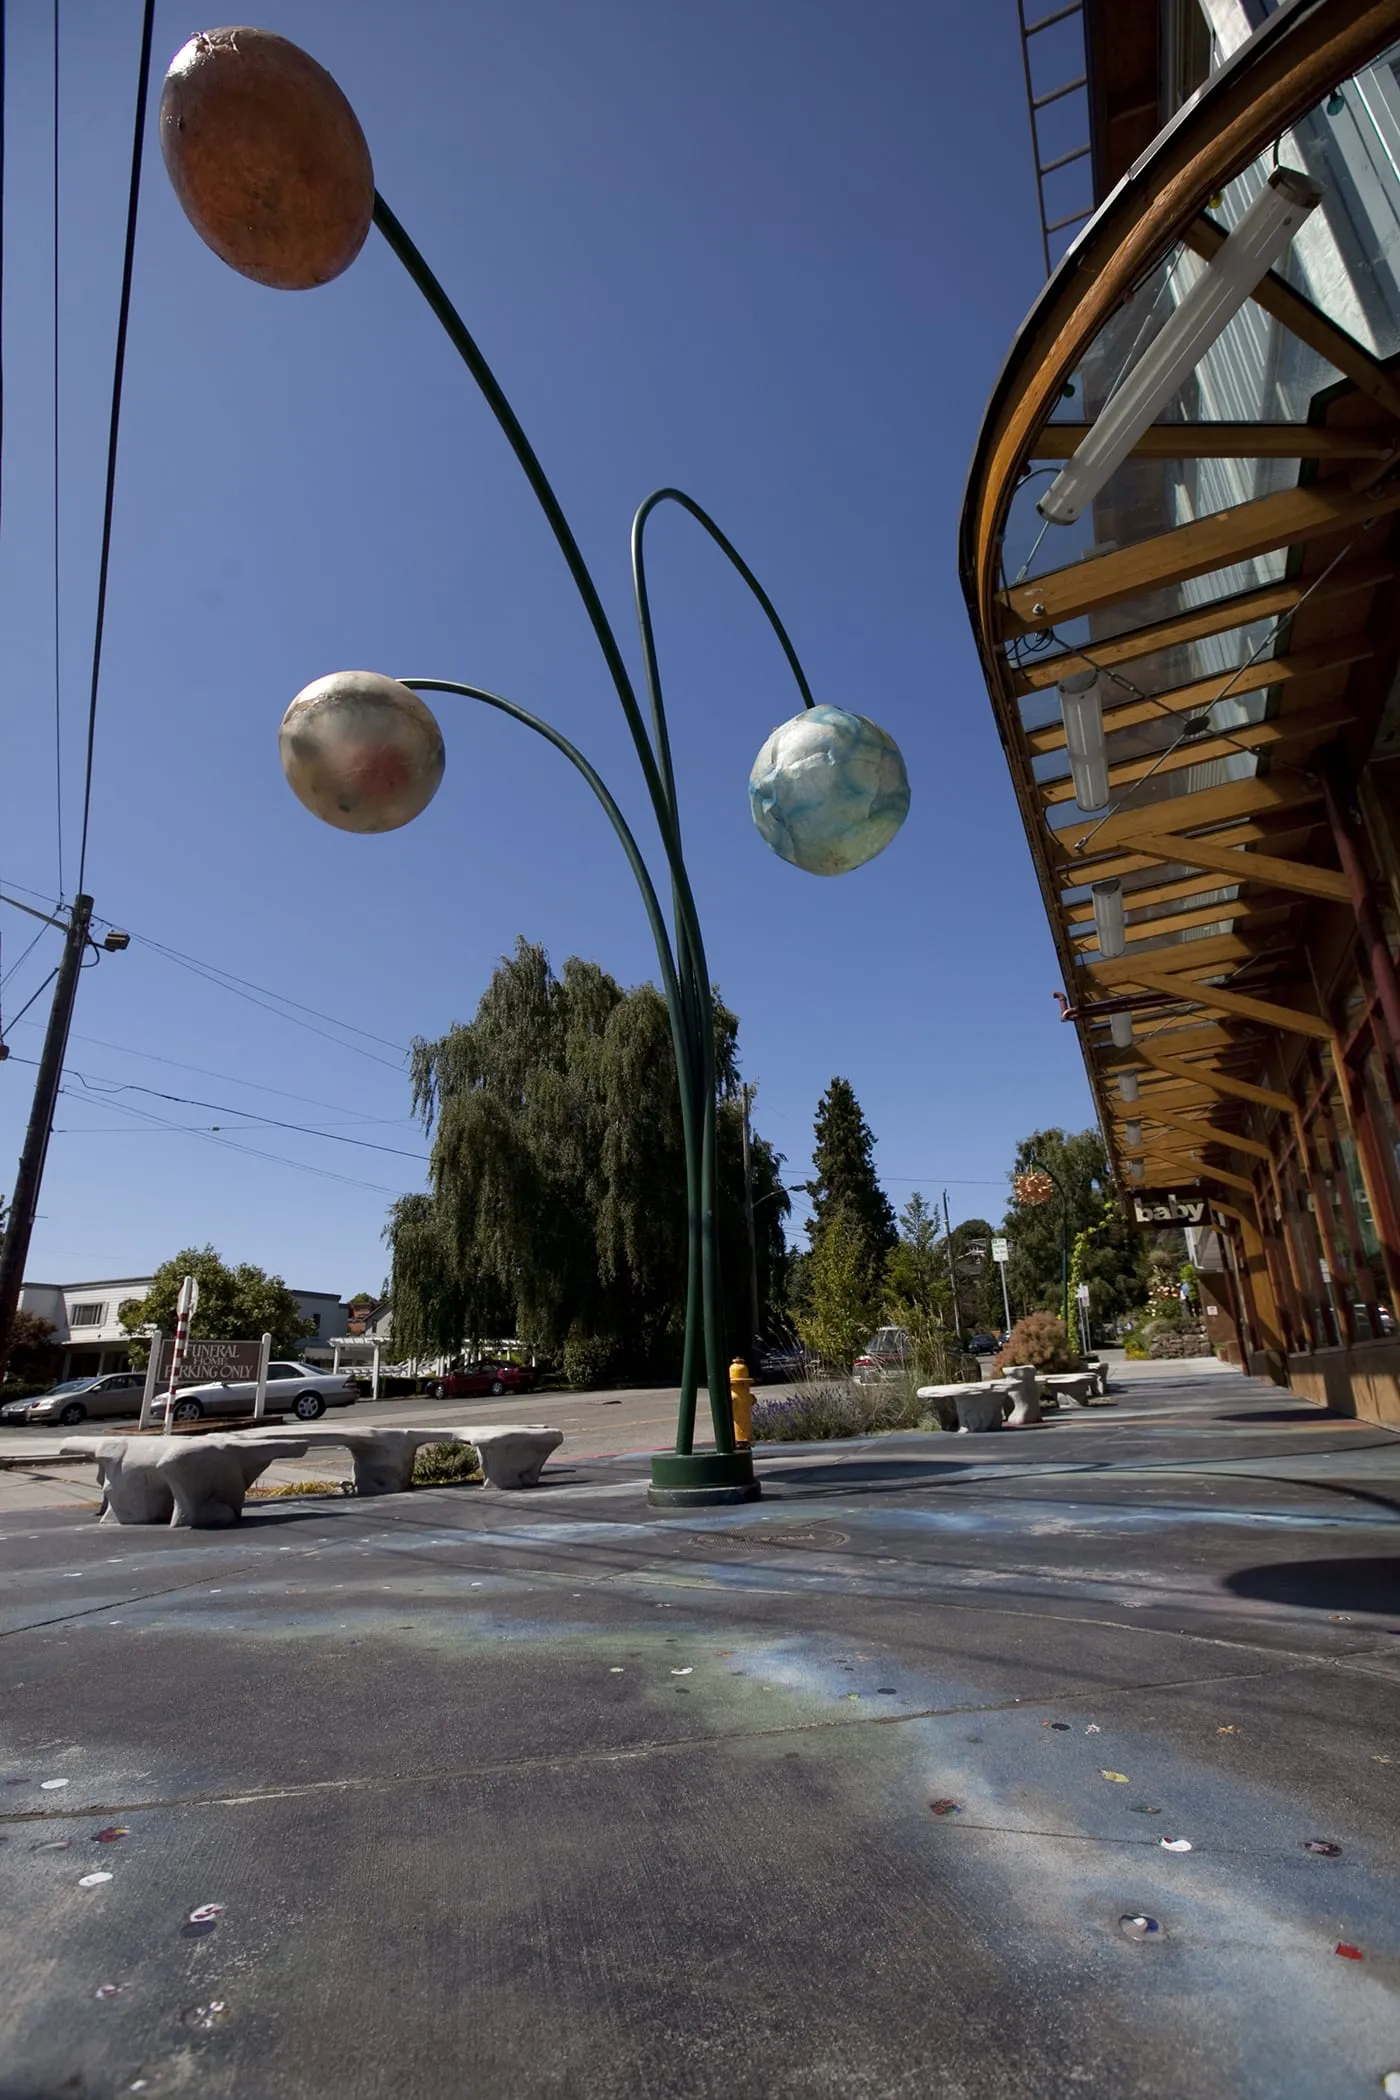 Space sculpture in the Fremont neighborhood of Seattle, Washington.